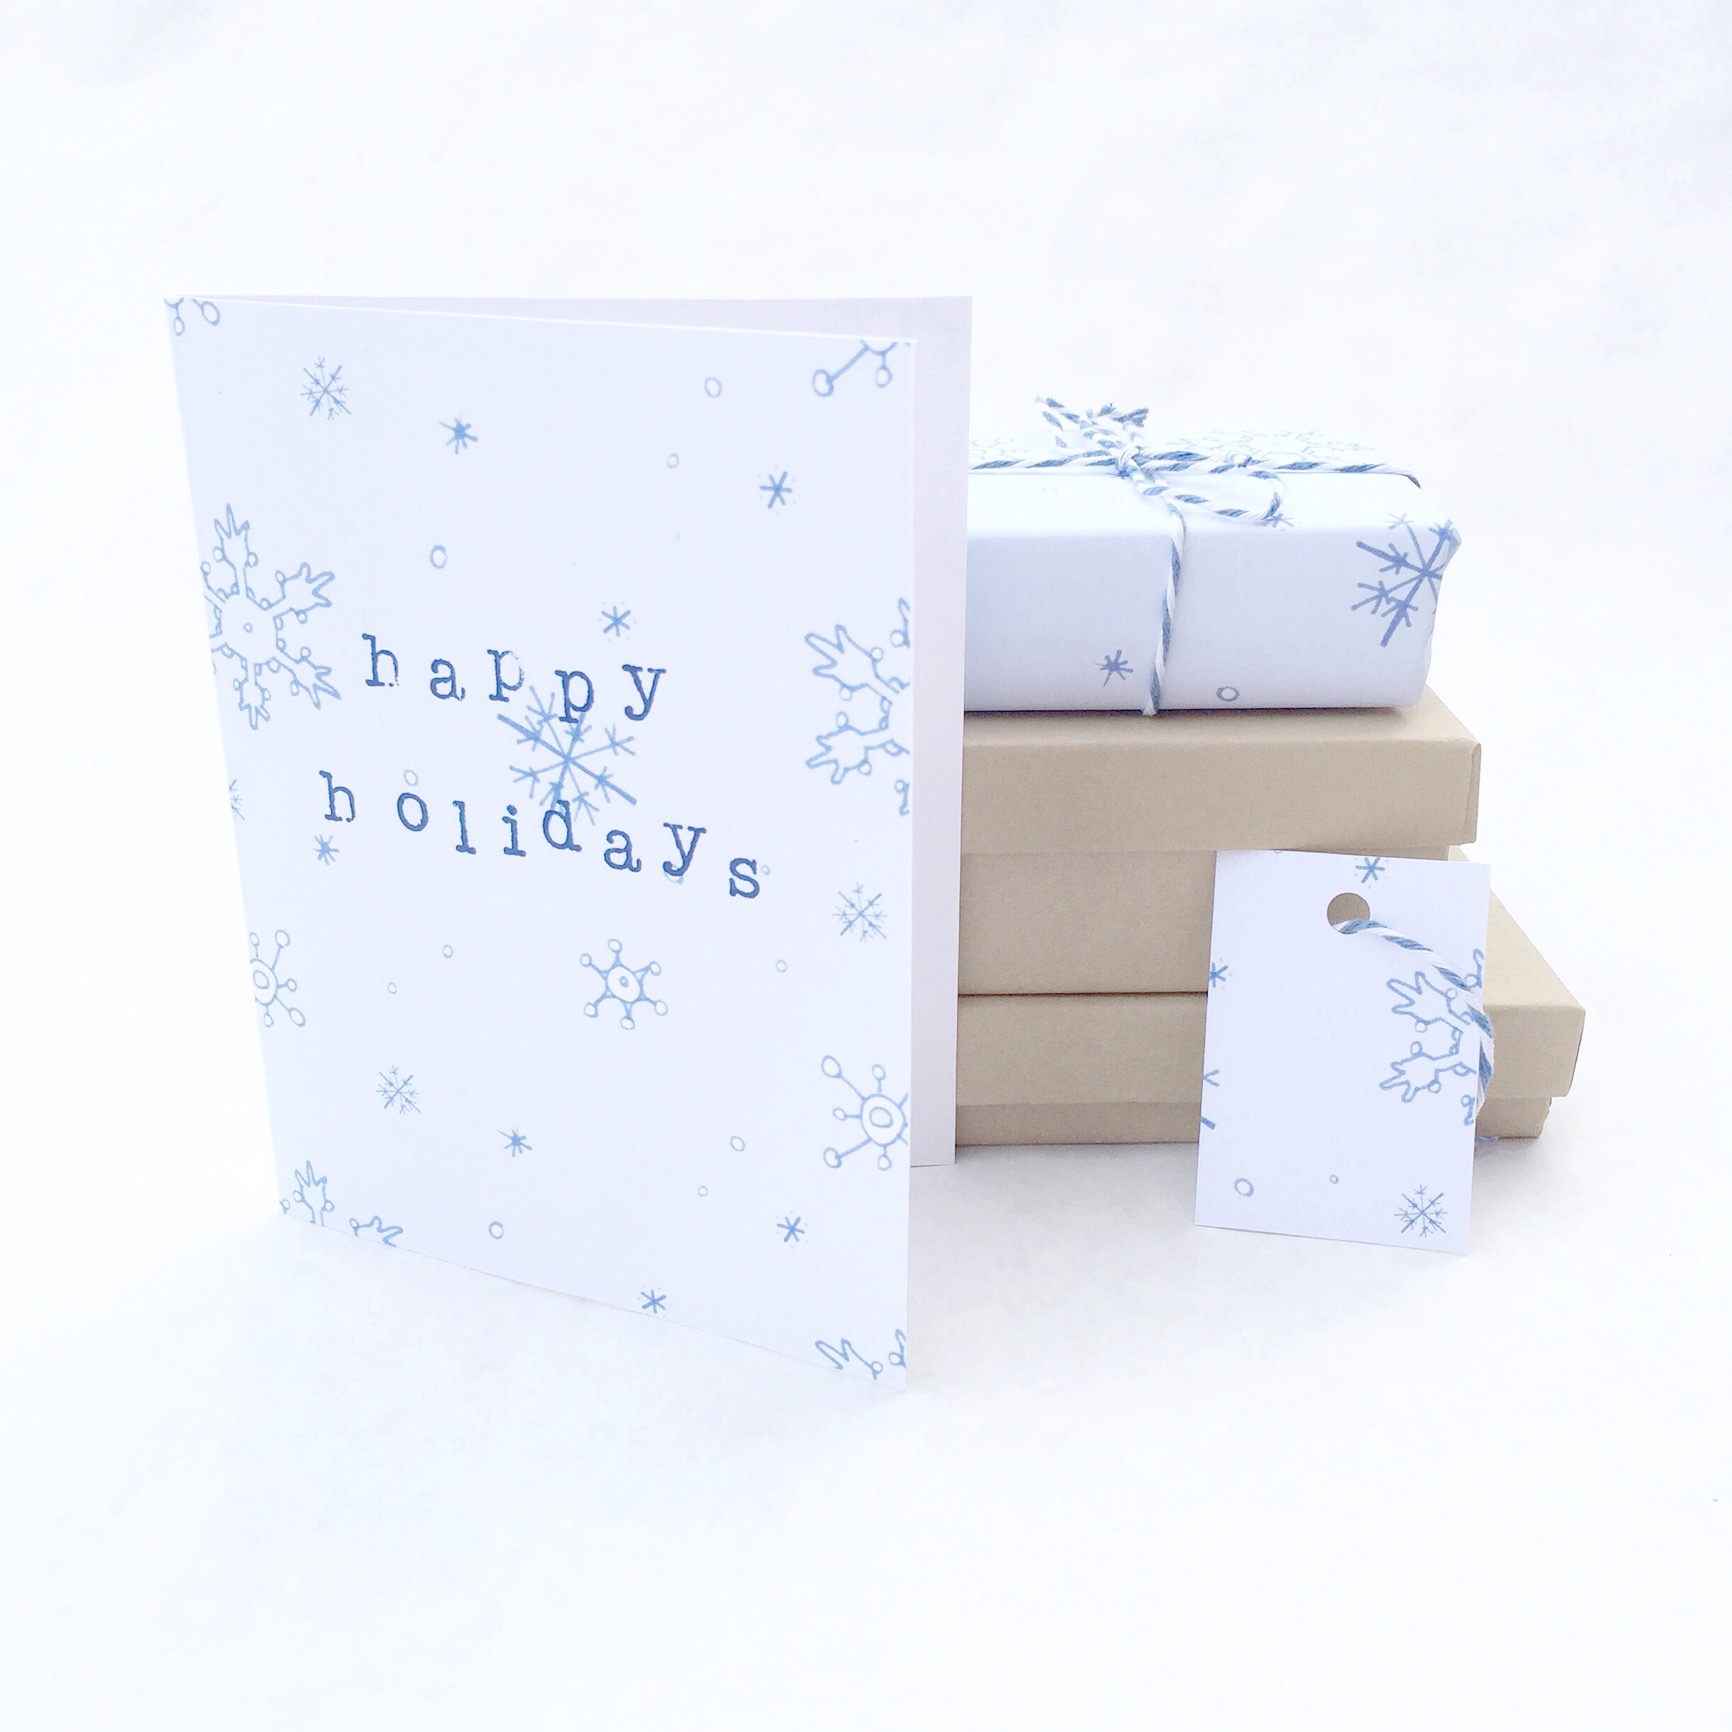 Snowflake Printable that you can Print at Home and Make Free Holiday Cards, Holiday Gift Tags, and Wrapping Paper | Homemade Christmas Gifts on the Pop Shop America DIY Blog